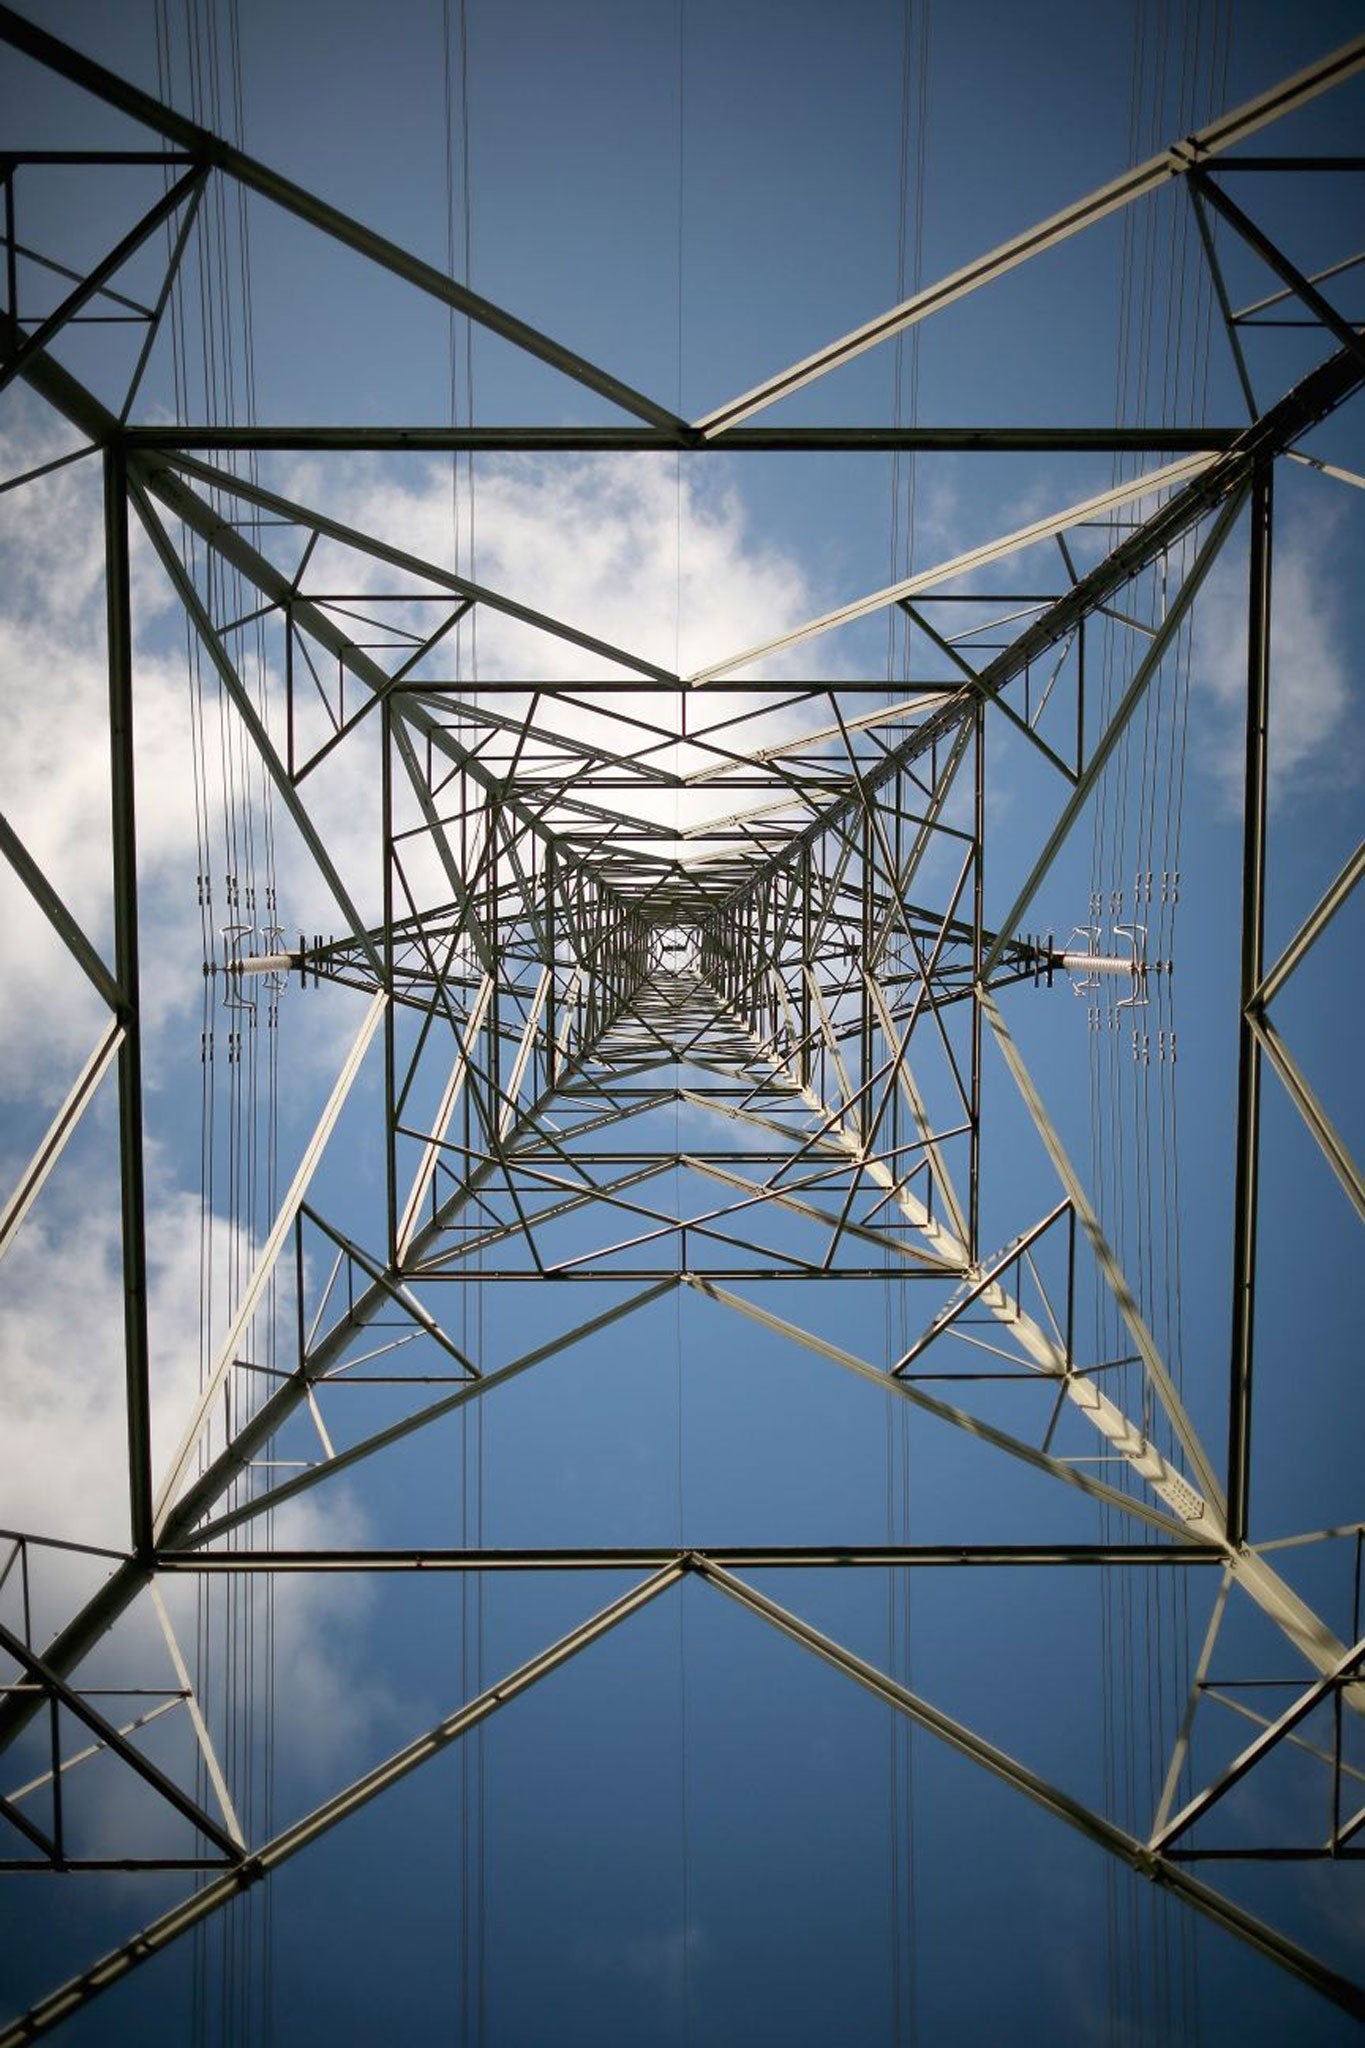 Pylon the agony: the big suppliers to Britain's power grid have provoked millions of complaints